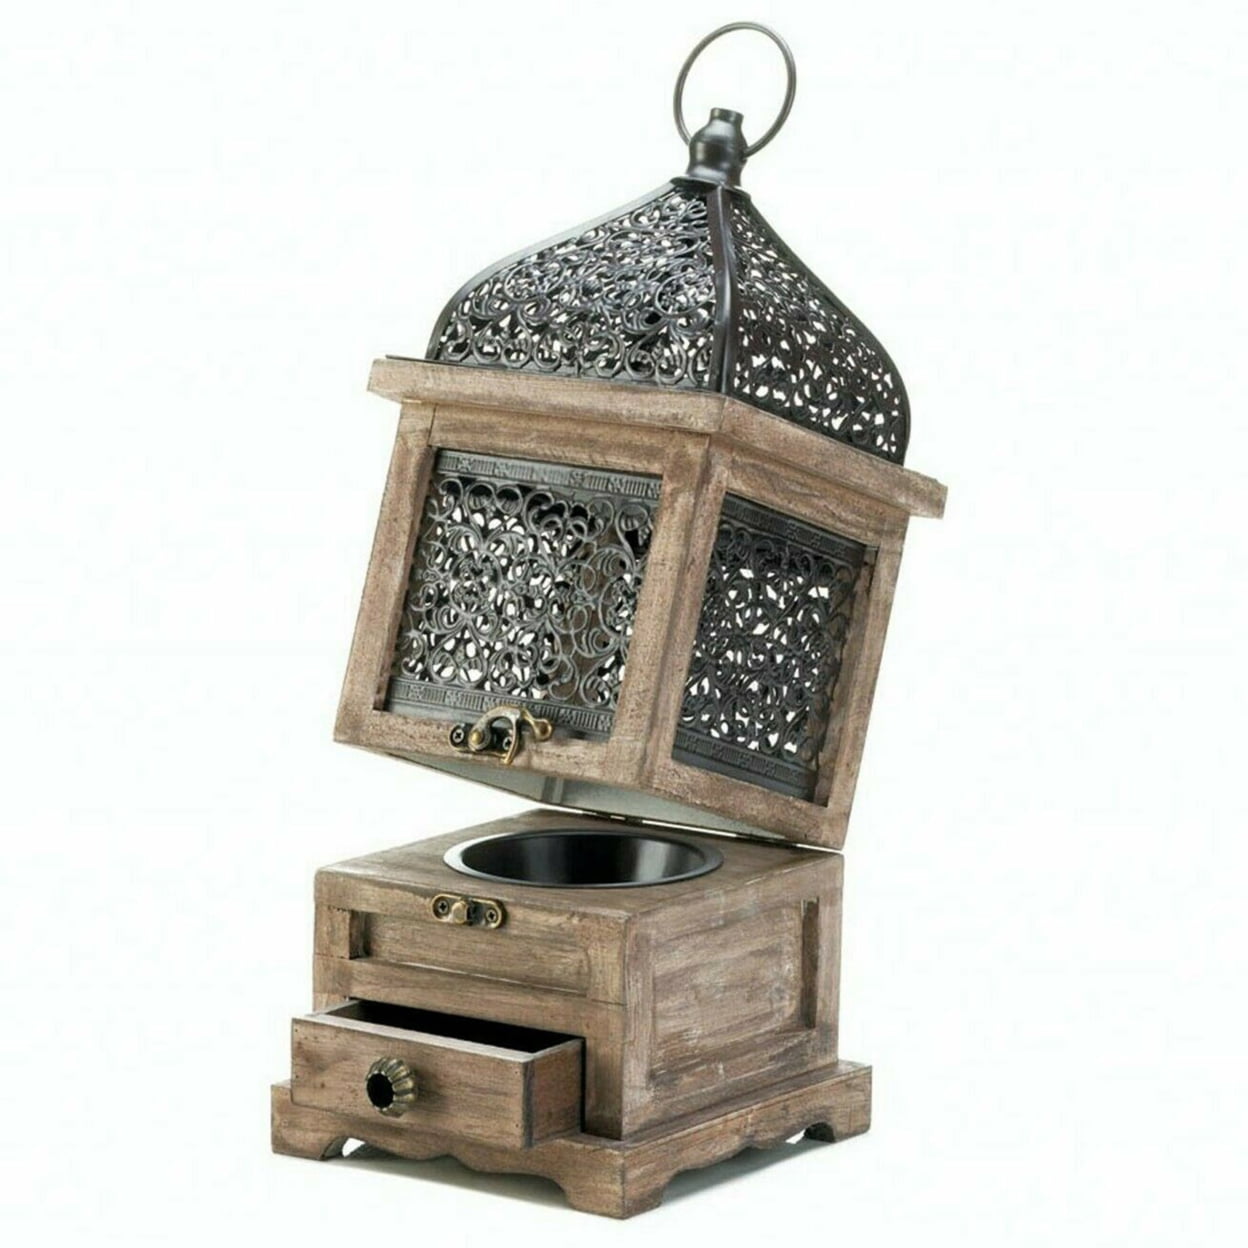 Aewholesale 10018058 14 in. Flip-Top Wood Lantern with Drawer